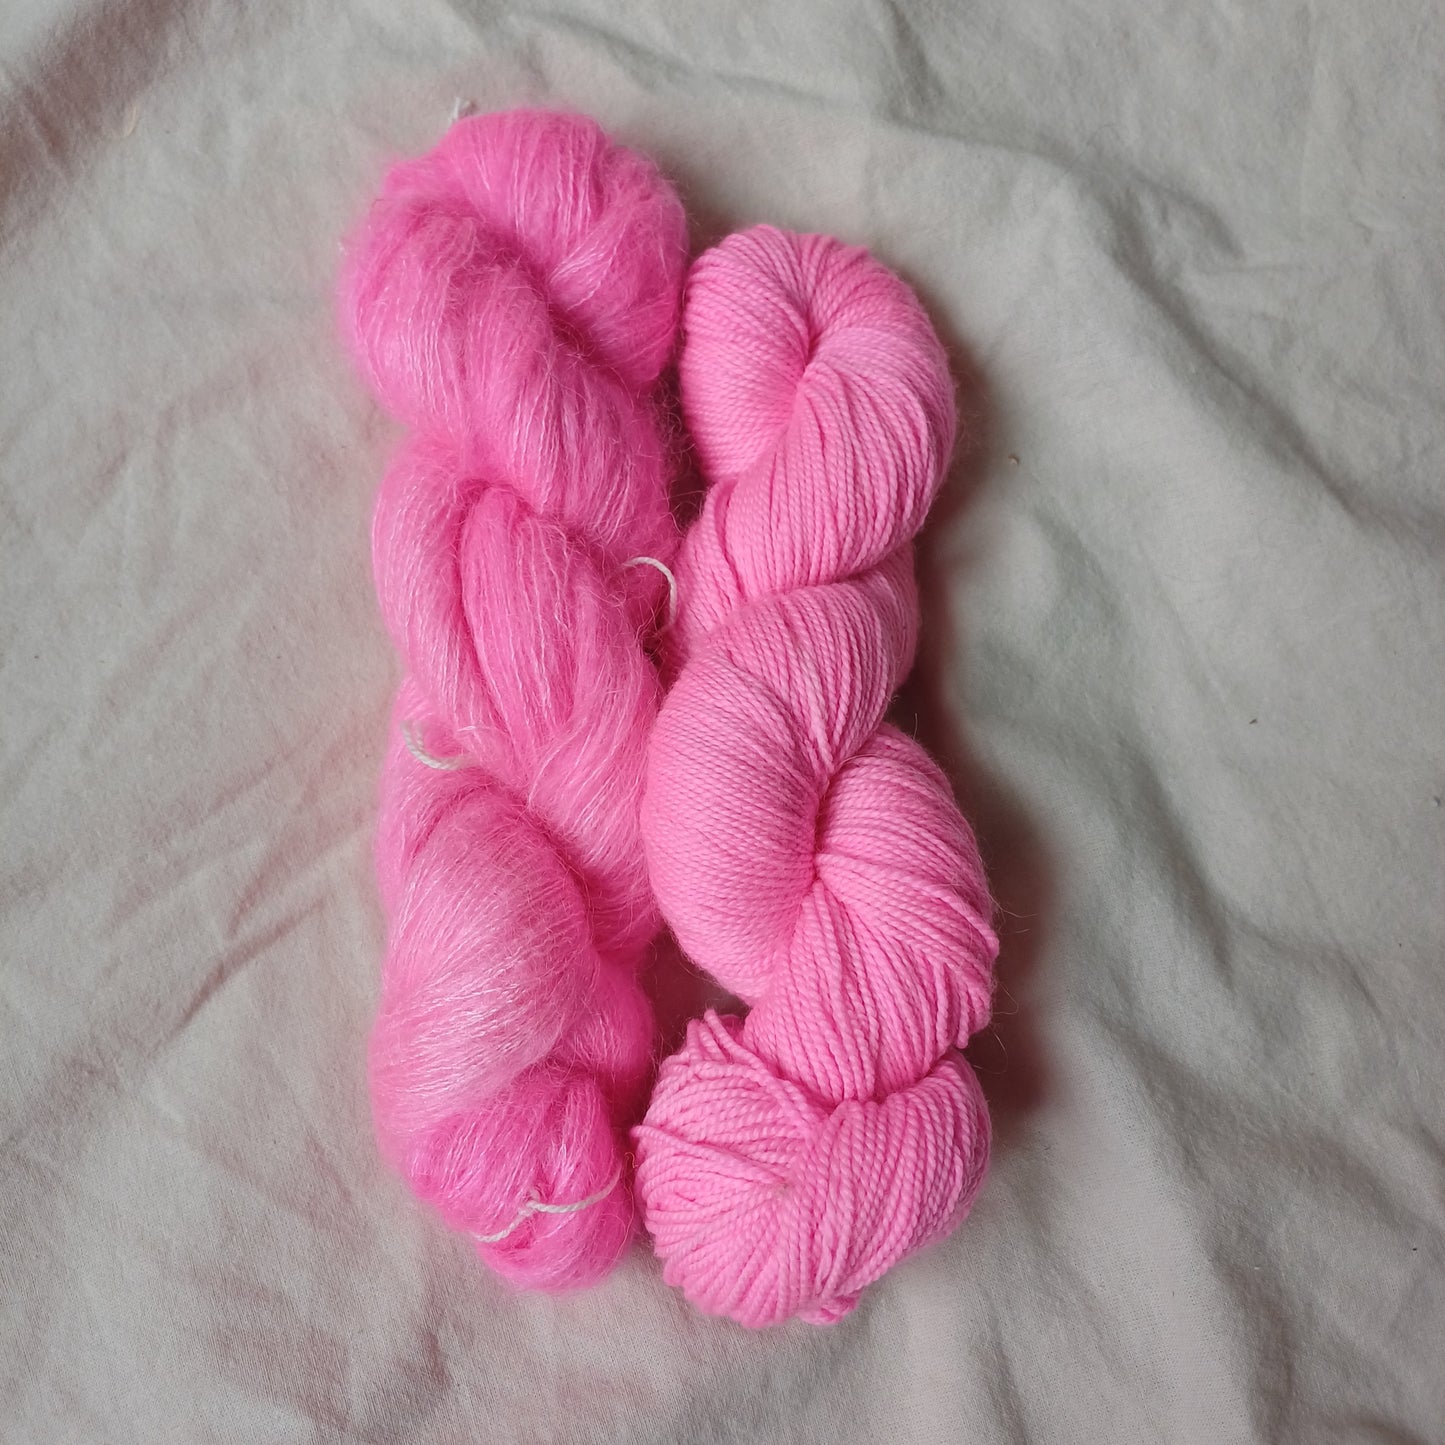 The Neon Edit "Bright Pink" in Frog Mouse Twisty Sock